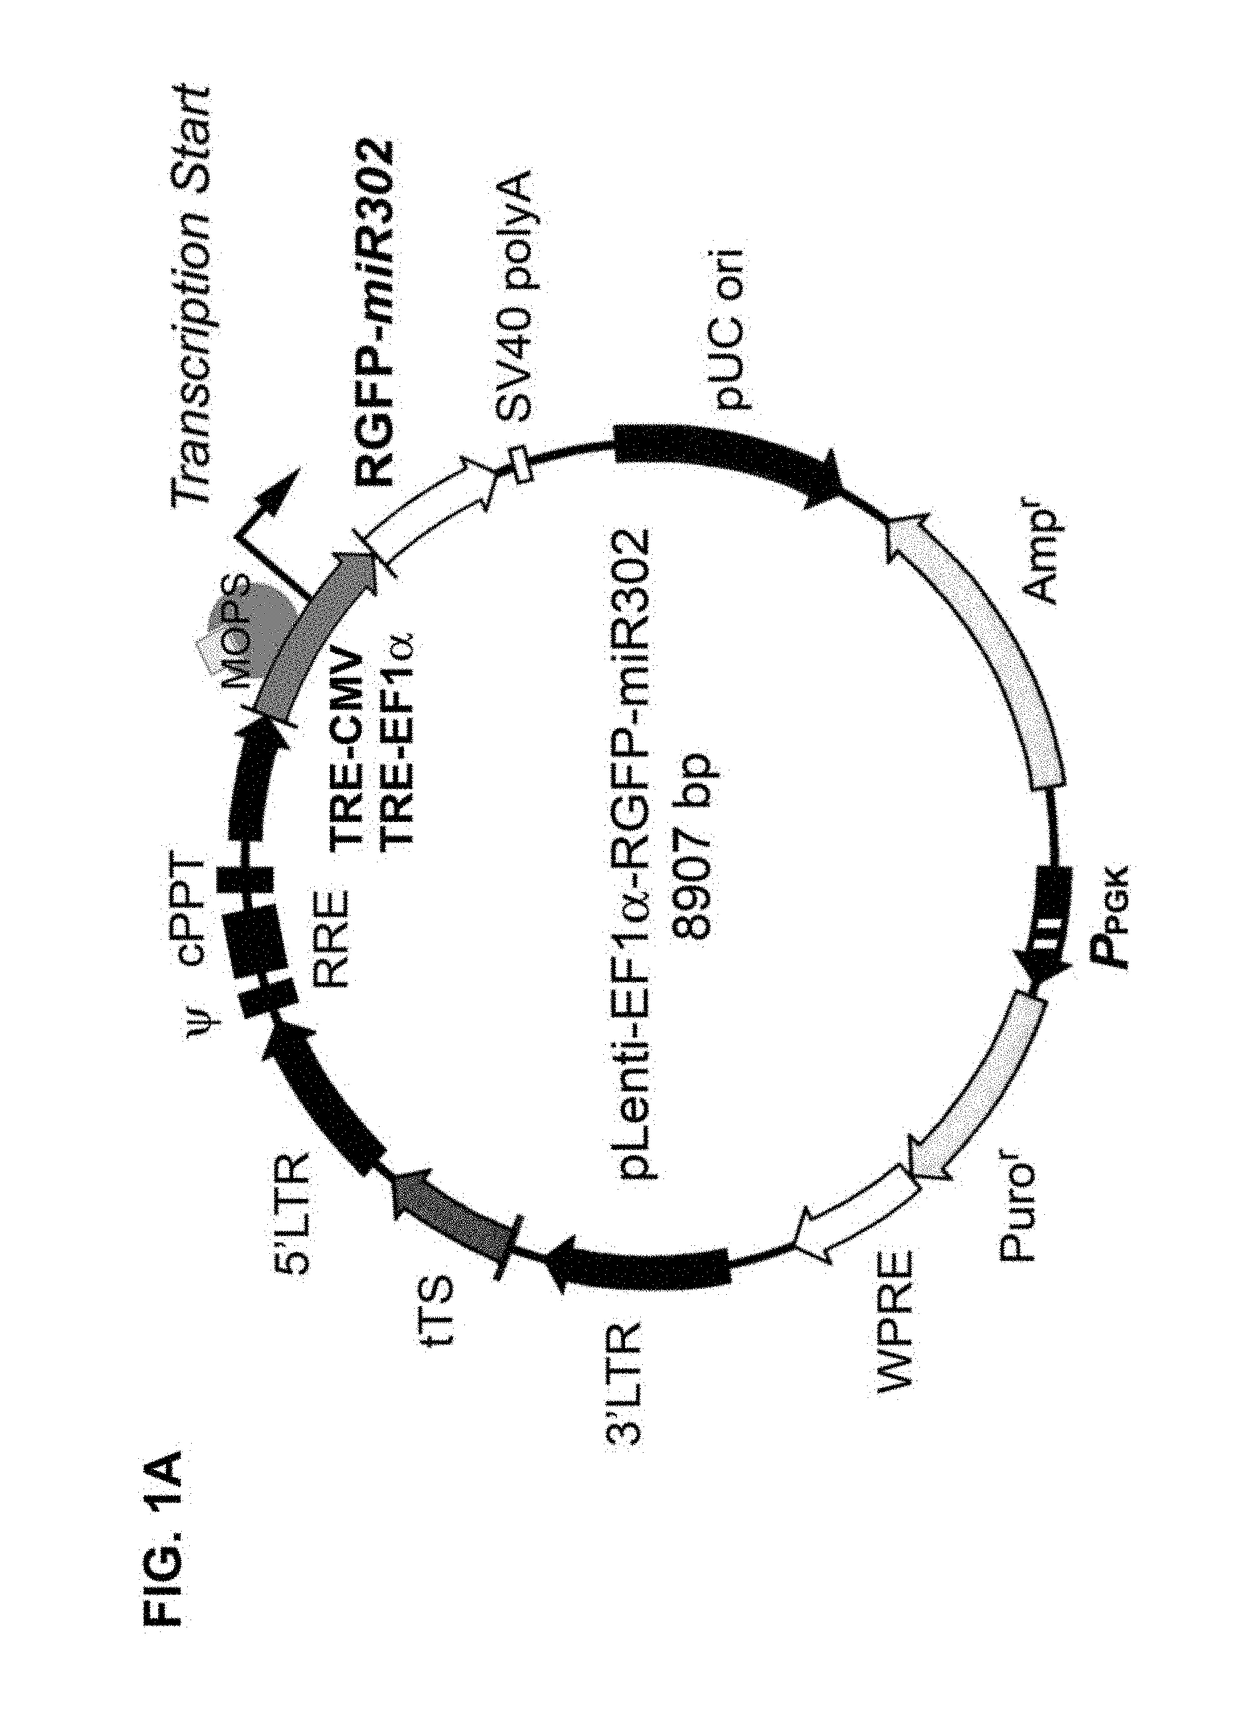 Composition and method of using mir-302 precursors as drugs for treating alzheimer's diseases